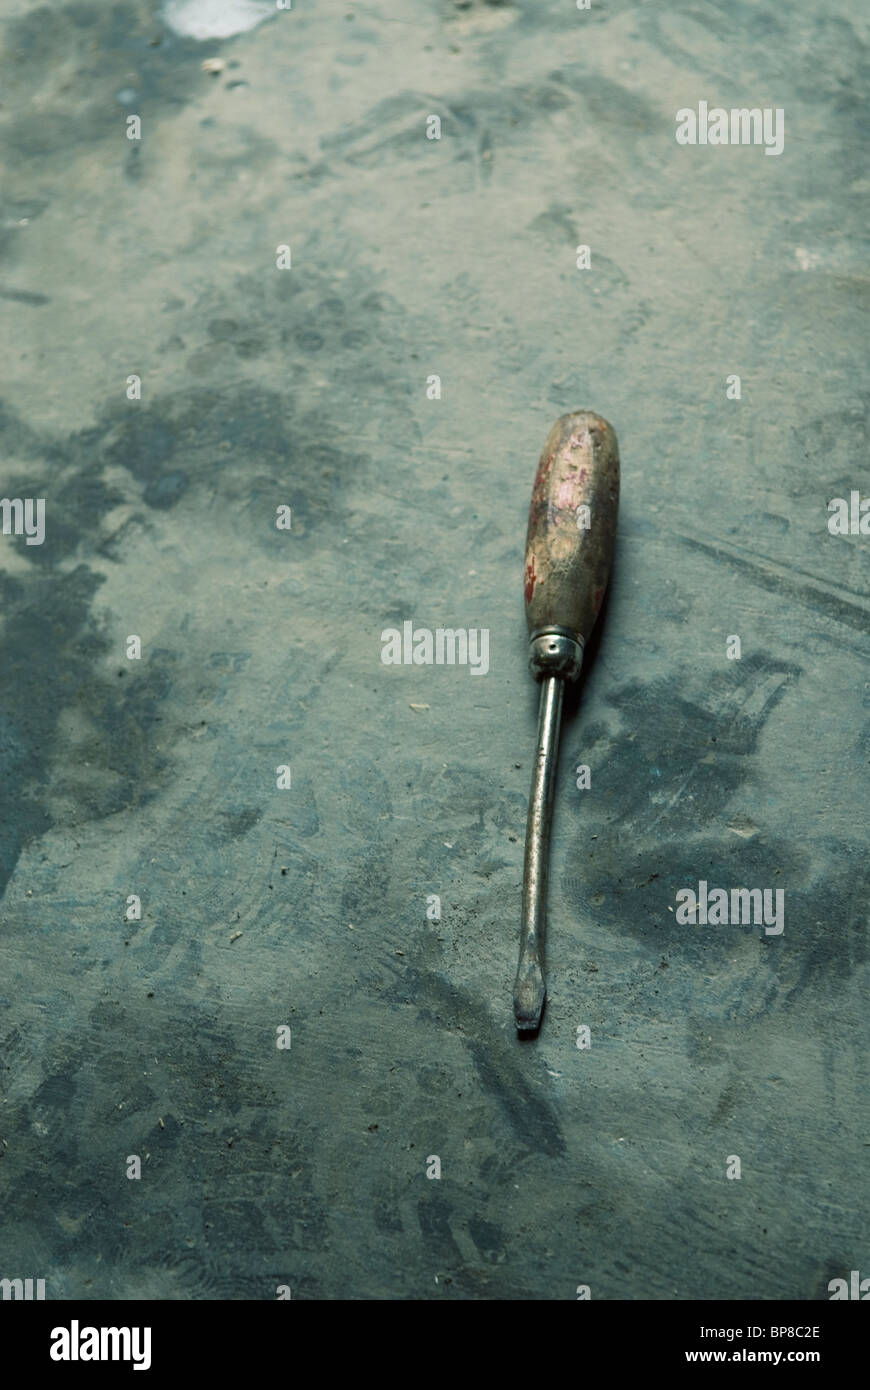 Old screwdriver forsook on the floor Stock Photo